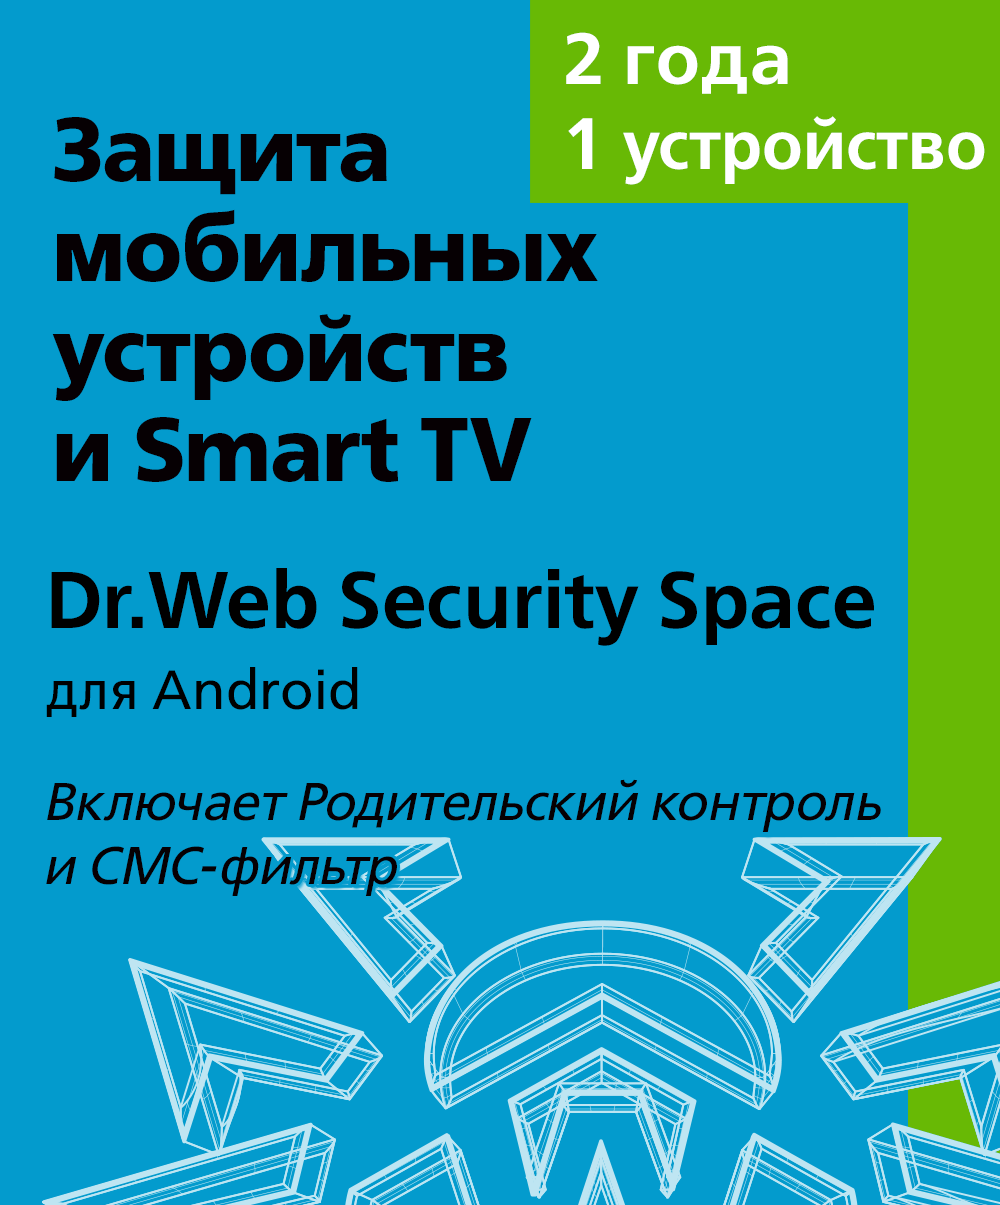 Dr.Web Security Space (for mobile devices) - for 1 device, for 24 months, KZ